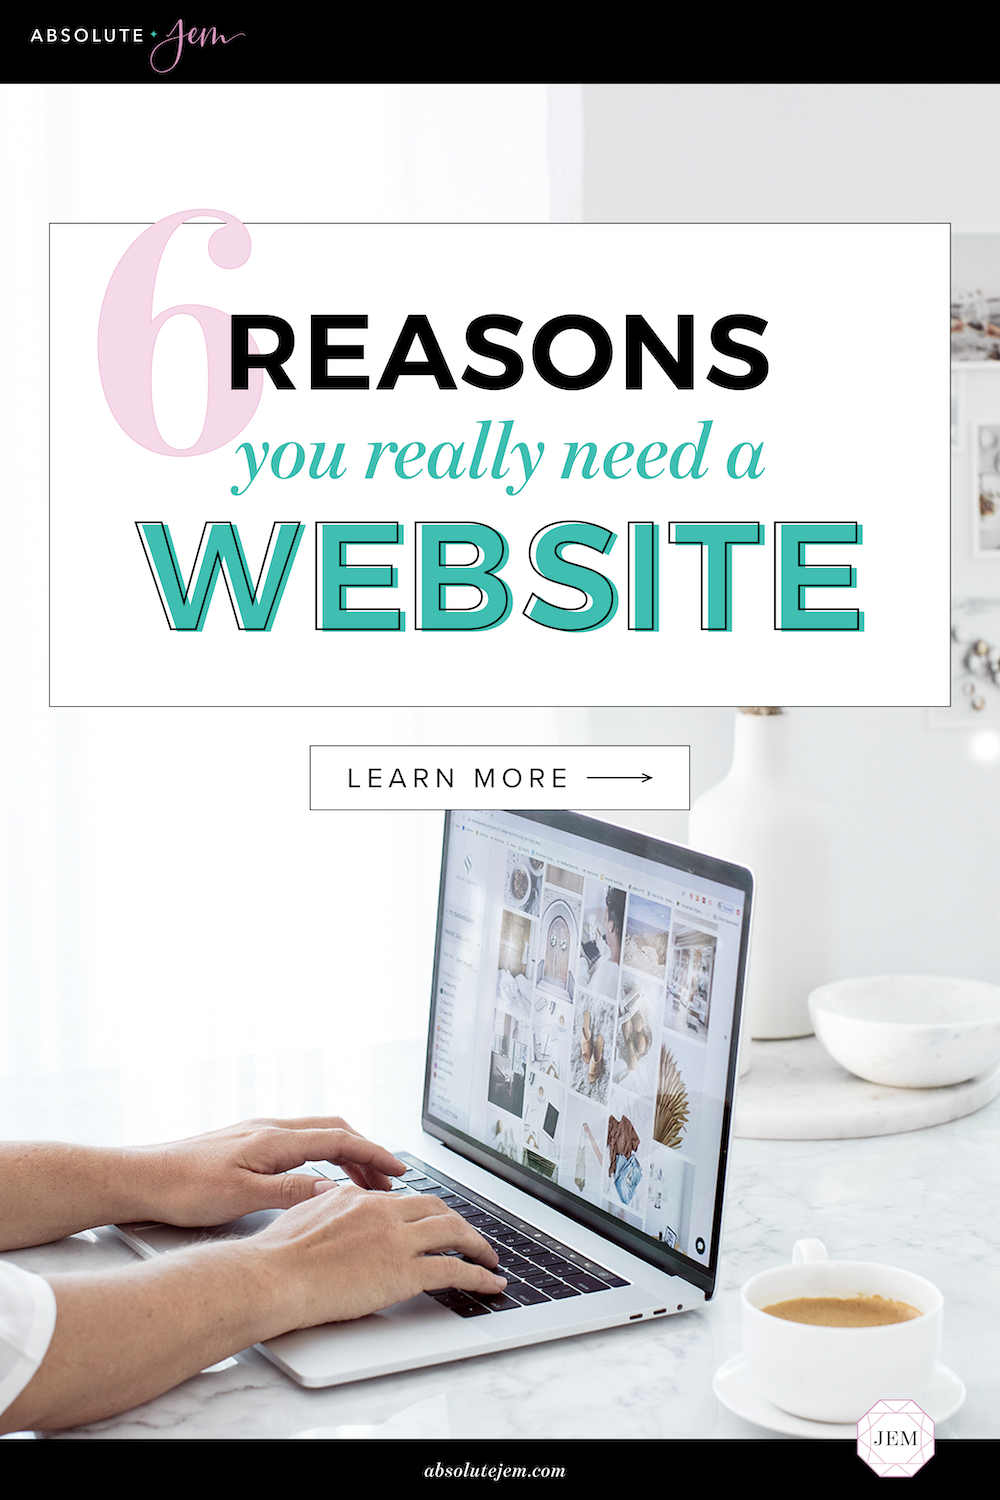 Reasons Why You Need a Website